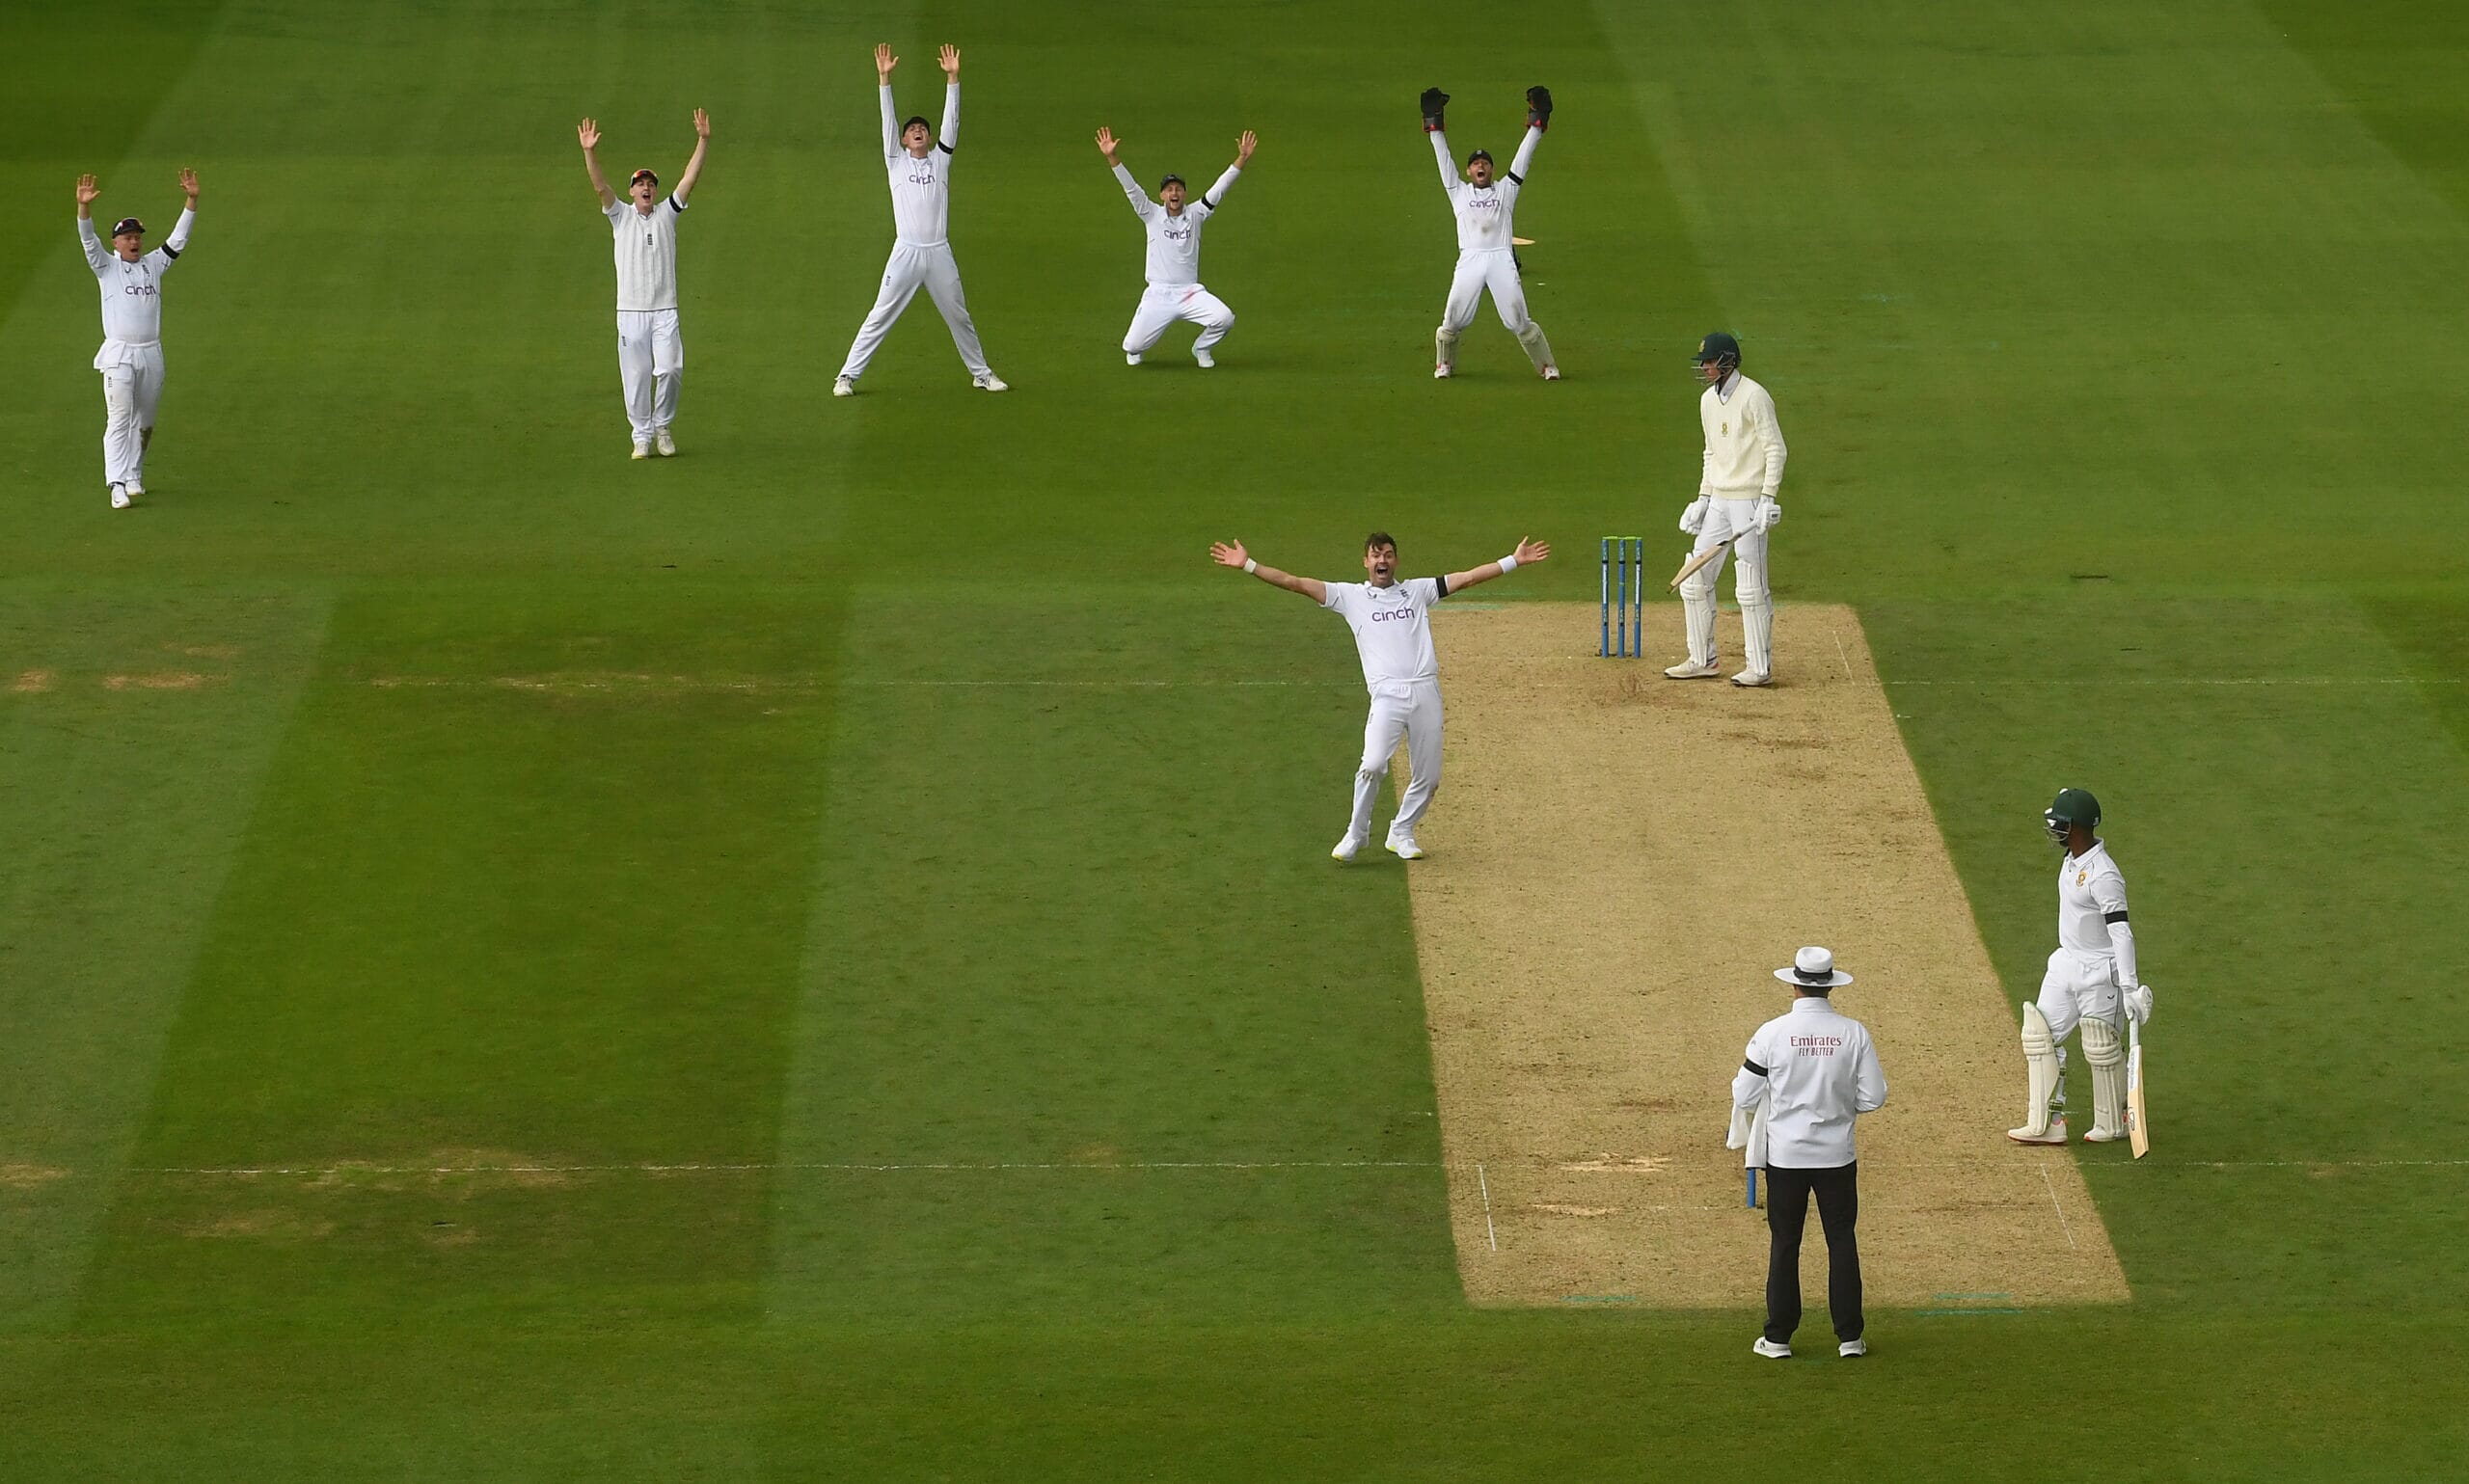 England Test Match featuring James Anderson appealing to the umpire for an LBW decision.